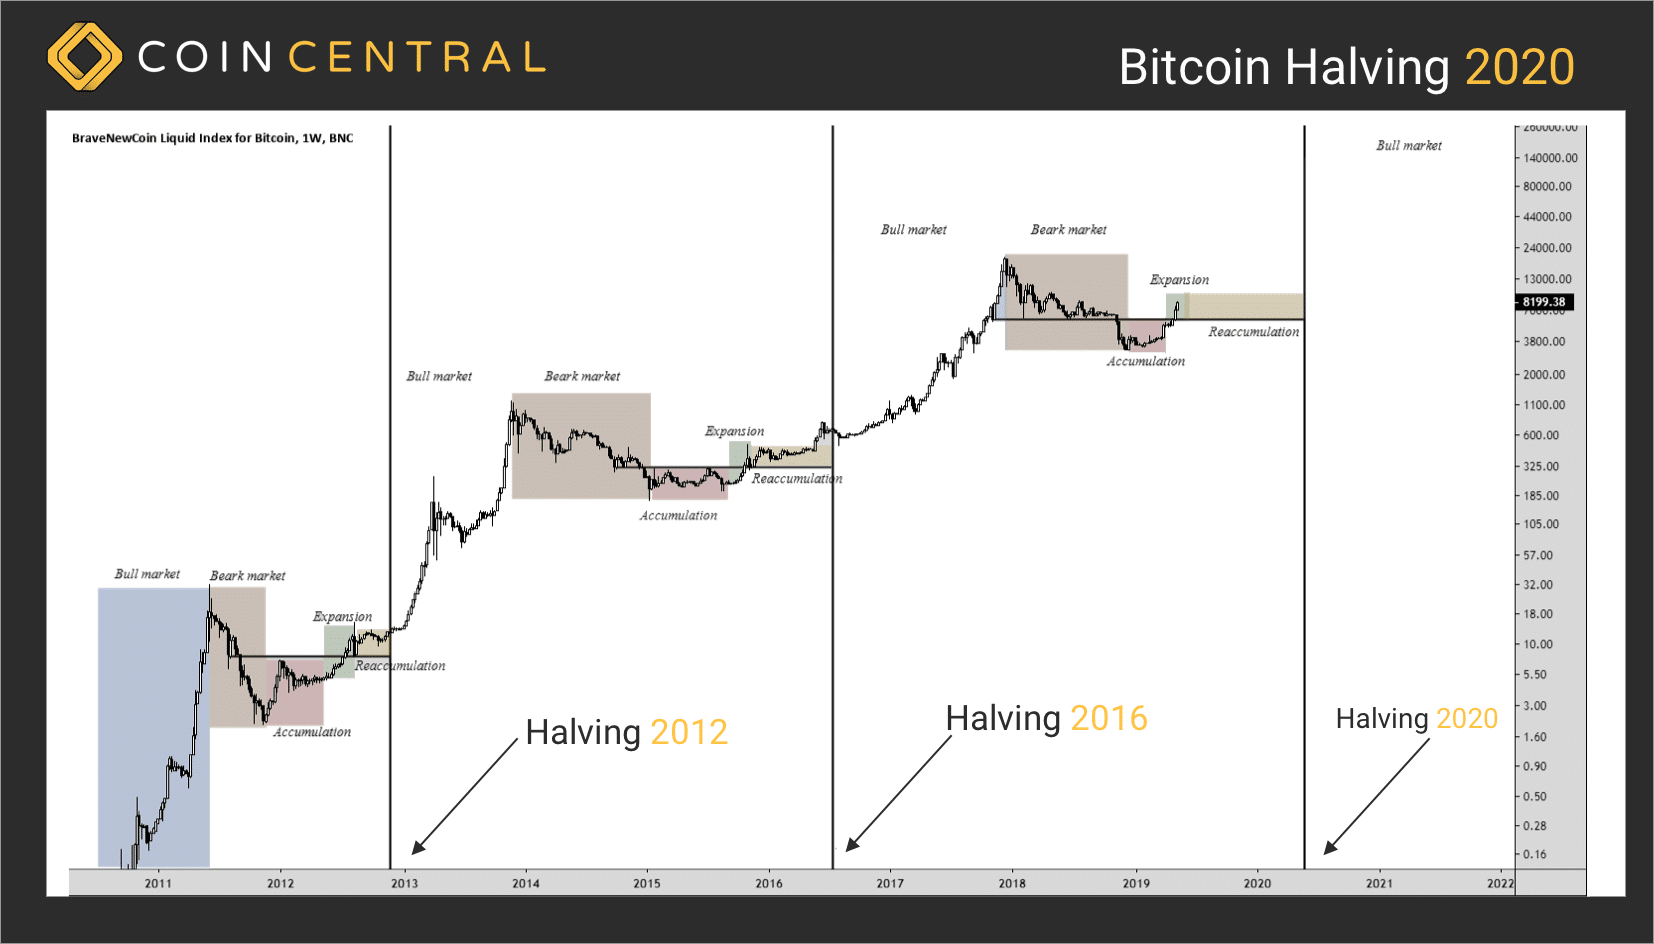 What Happens to Bitcoin After All 21 Million Are Mined?